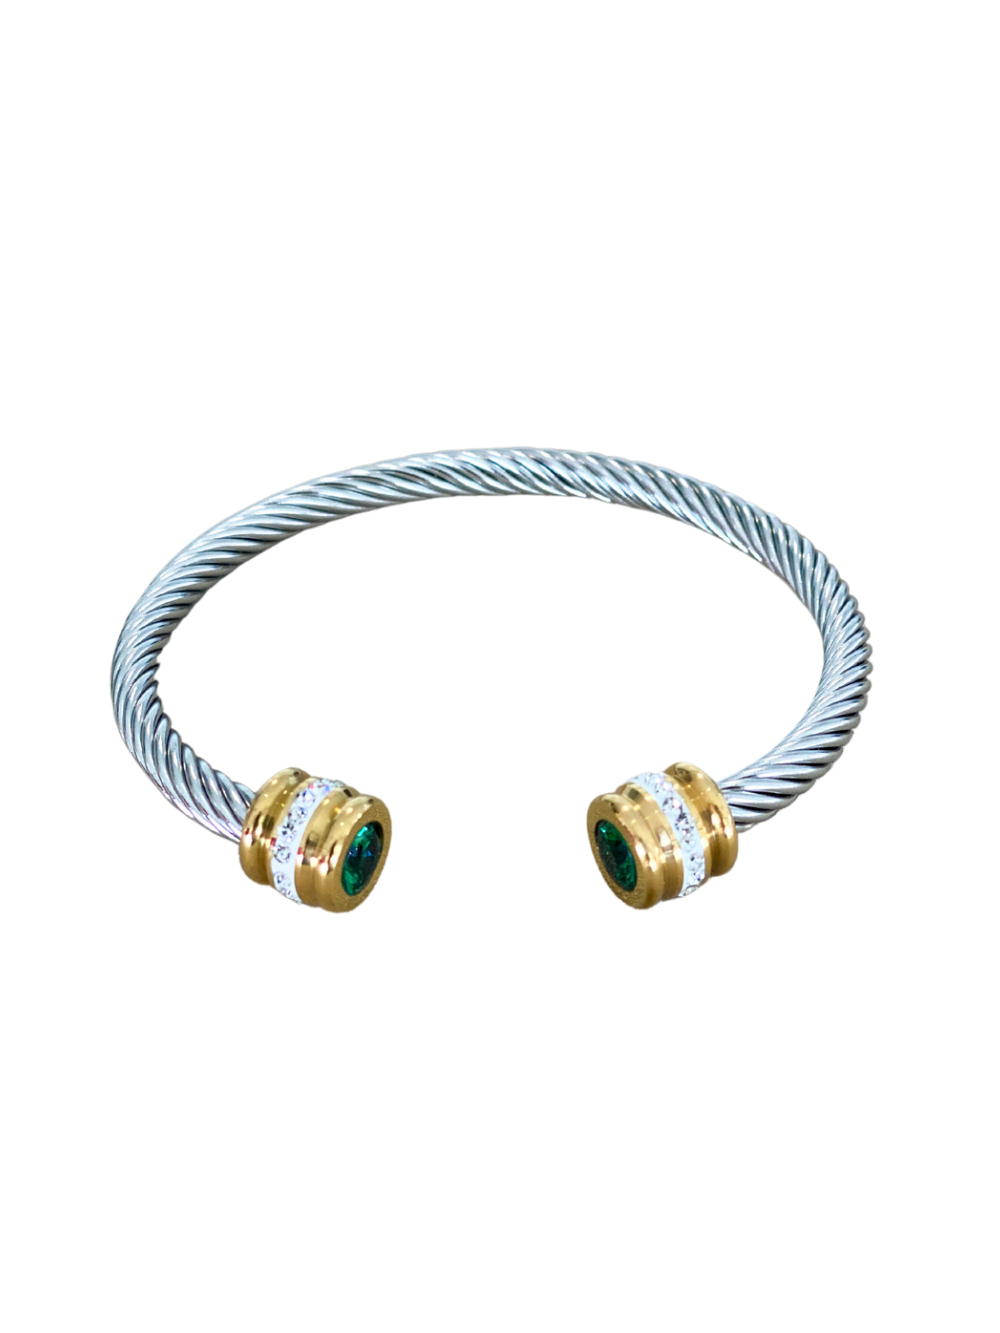 Green Two Tone Cable Bracelet